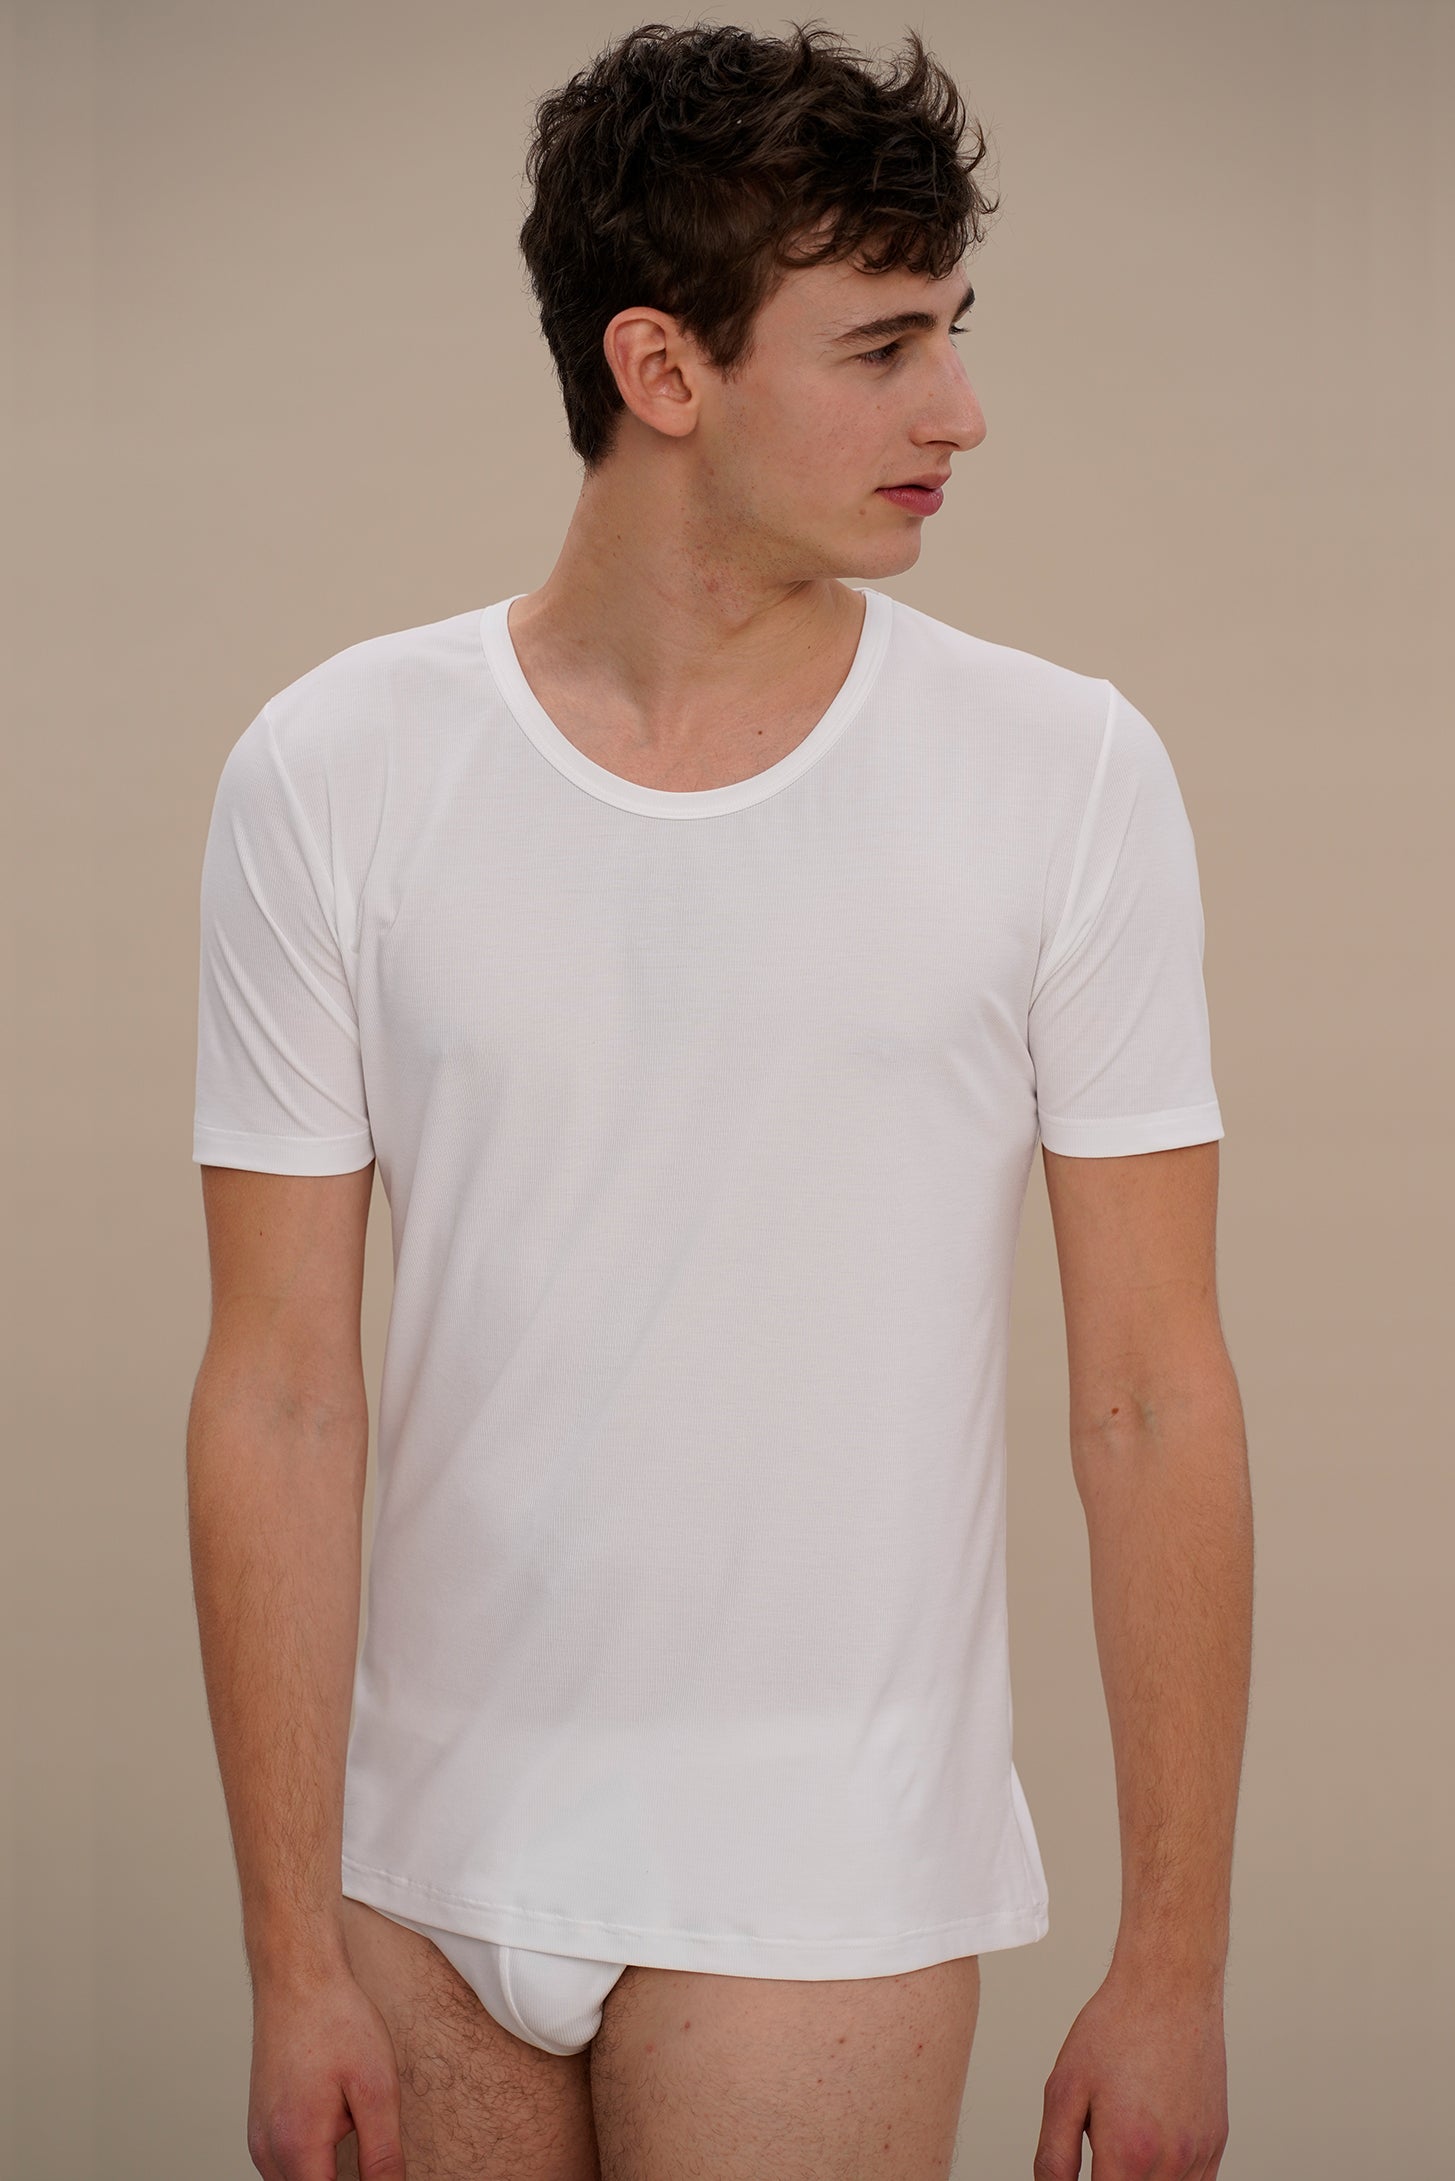 T-shirt / undershirt in white made from natural MicroModal from moi-basics